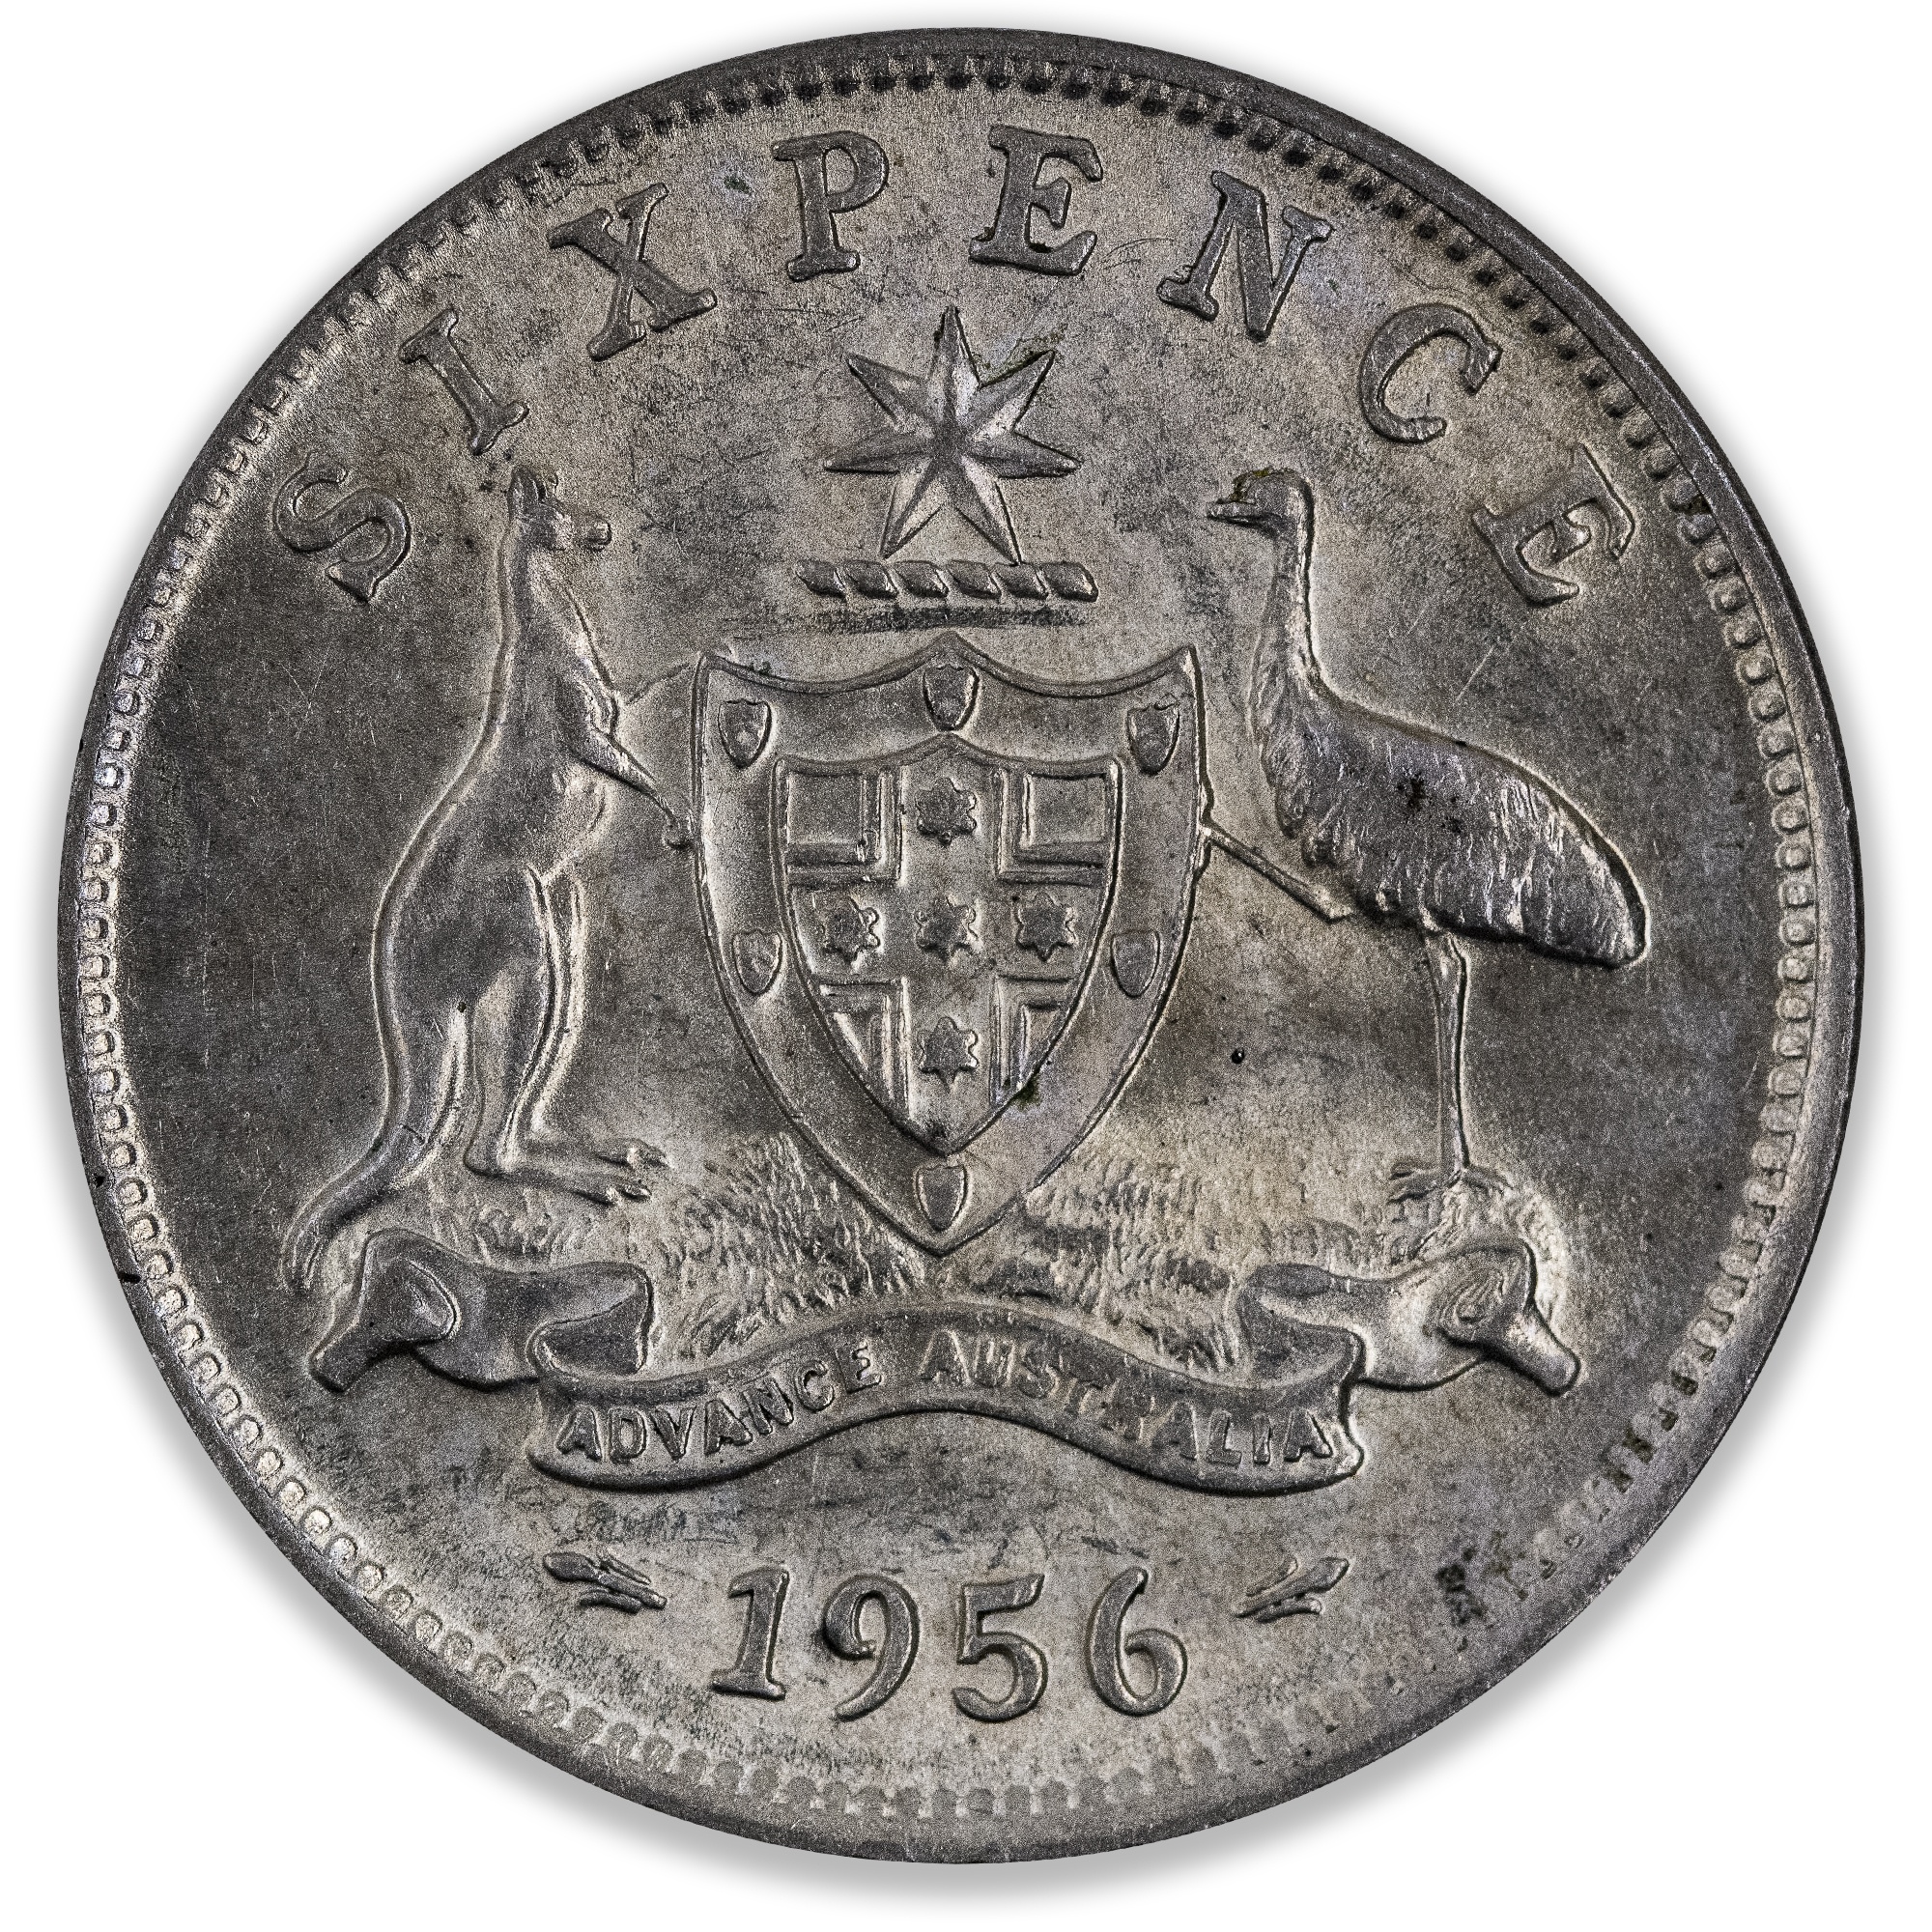 1956 Australian Sixpence About Uncirculated